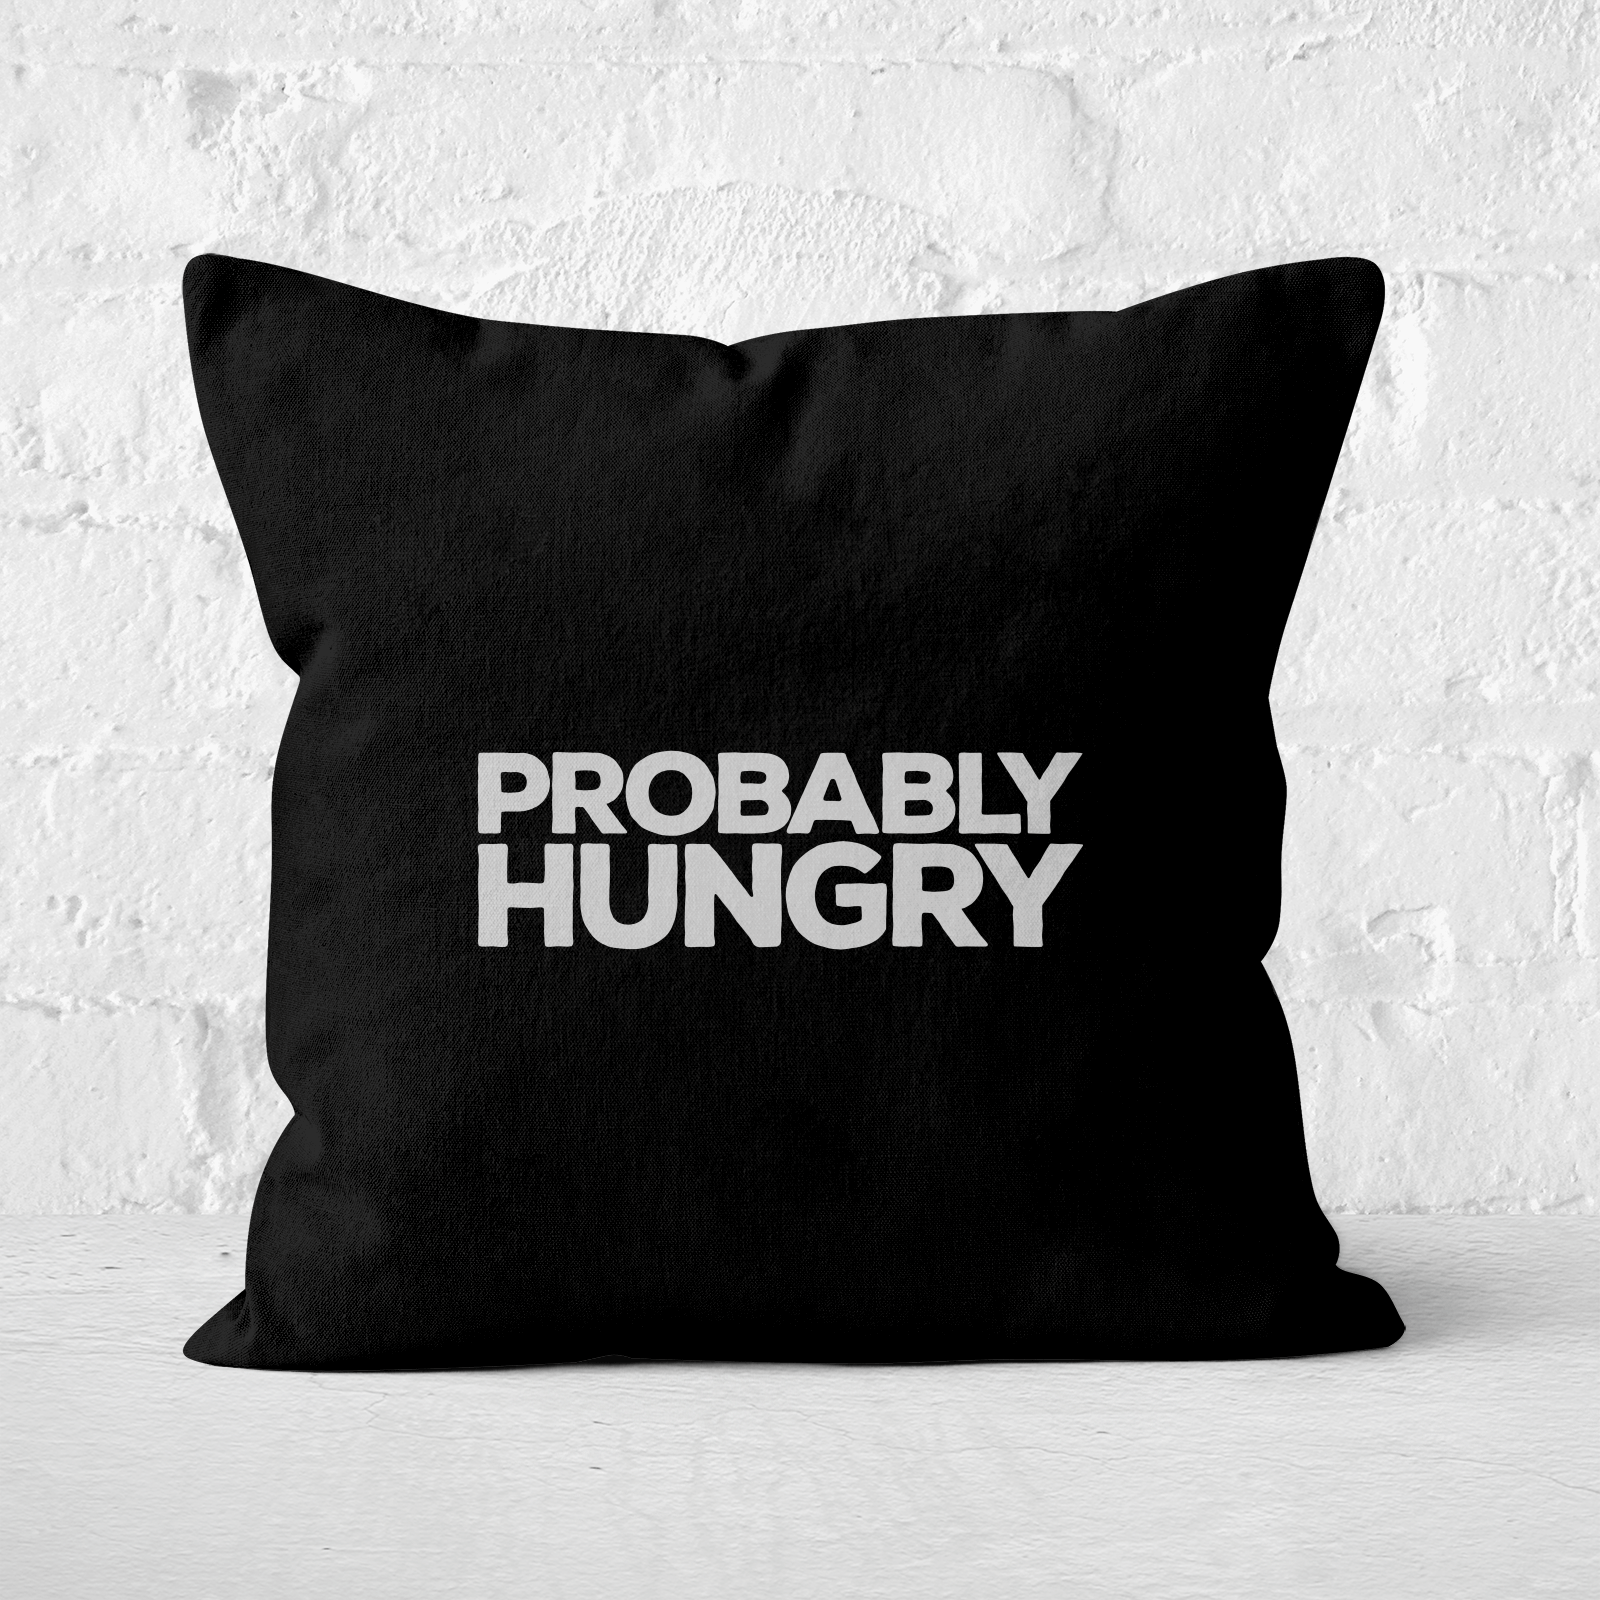 Probably Hungry Square Cushion - 60x60cm - Soft Touch